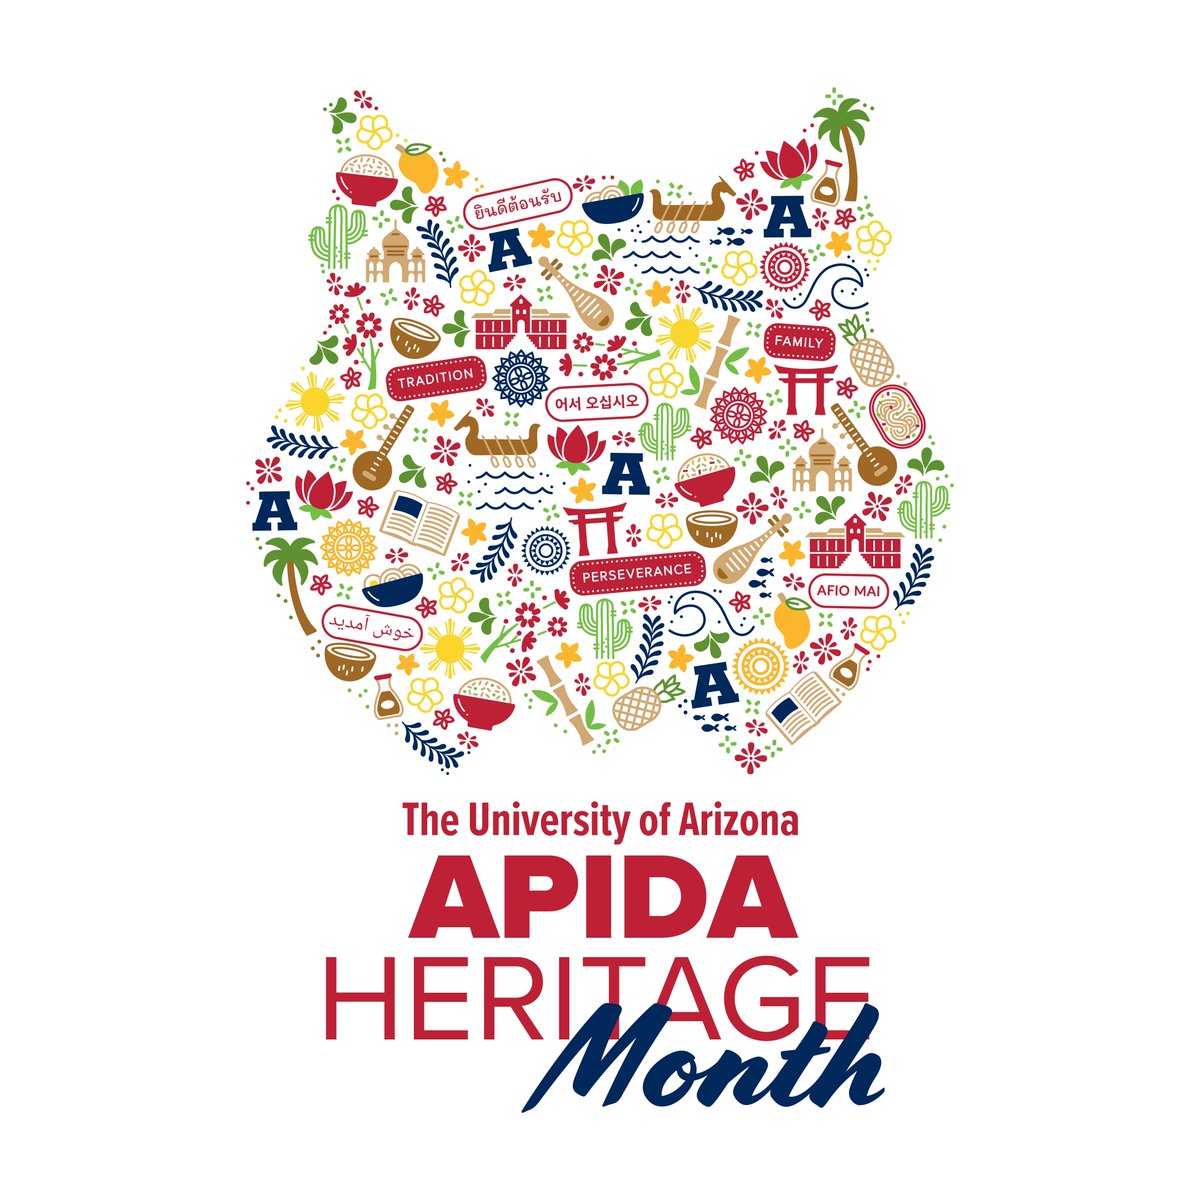 This month we celebrate Asian, Pacific Islander, and Desi American Heritage Month! We honor and celebrate our many APIDA students, staff, faculty, and community partners. #APIDA #APAHM Learn more from UArizona's APA Student Affairs calendar of events: apasa.arizona.edu/apida-heritage…